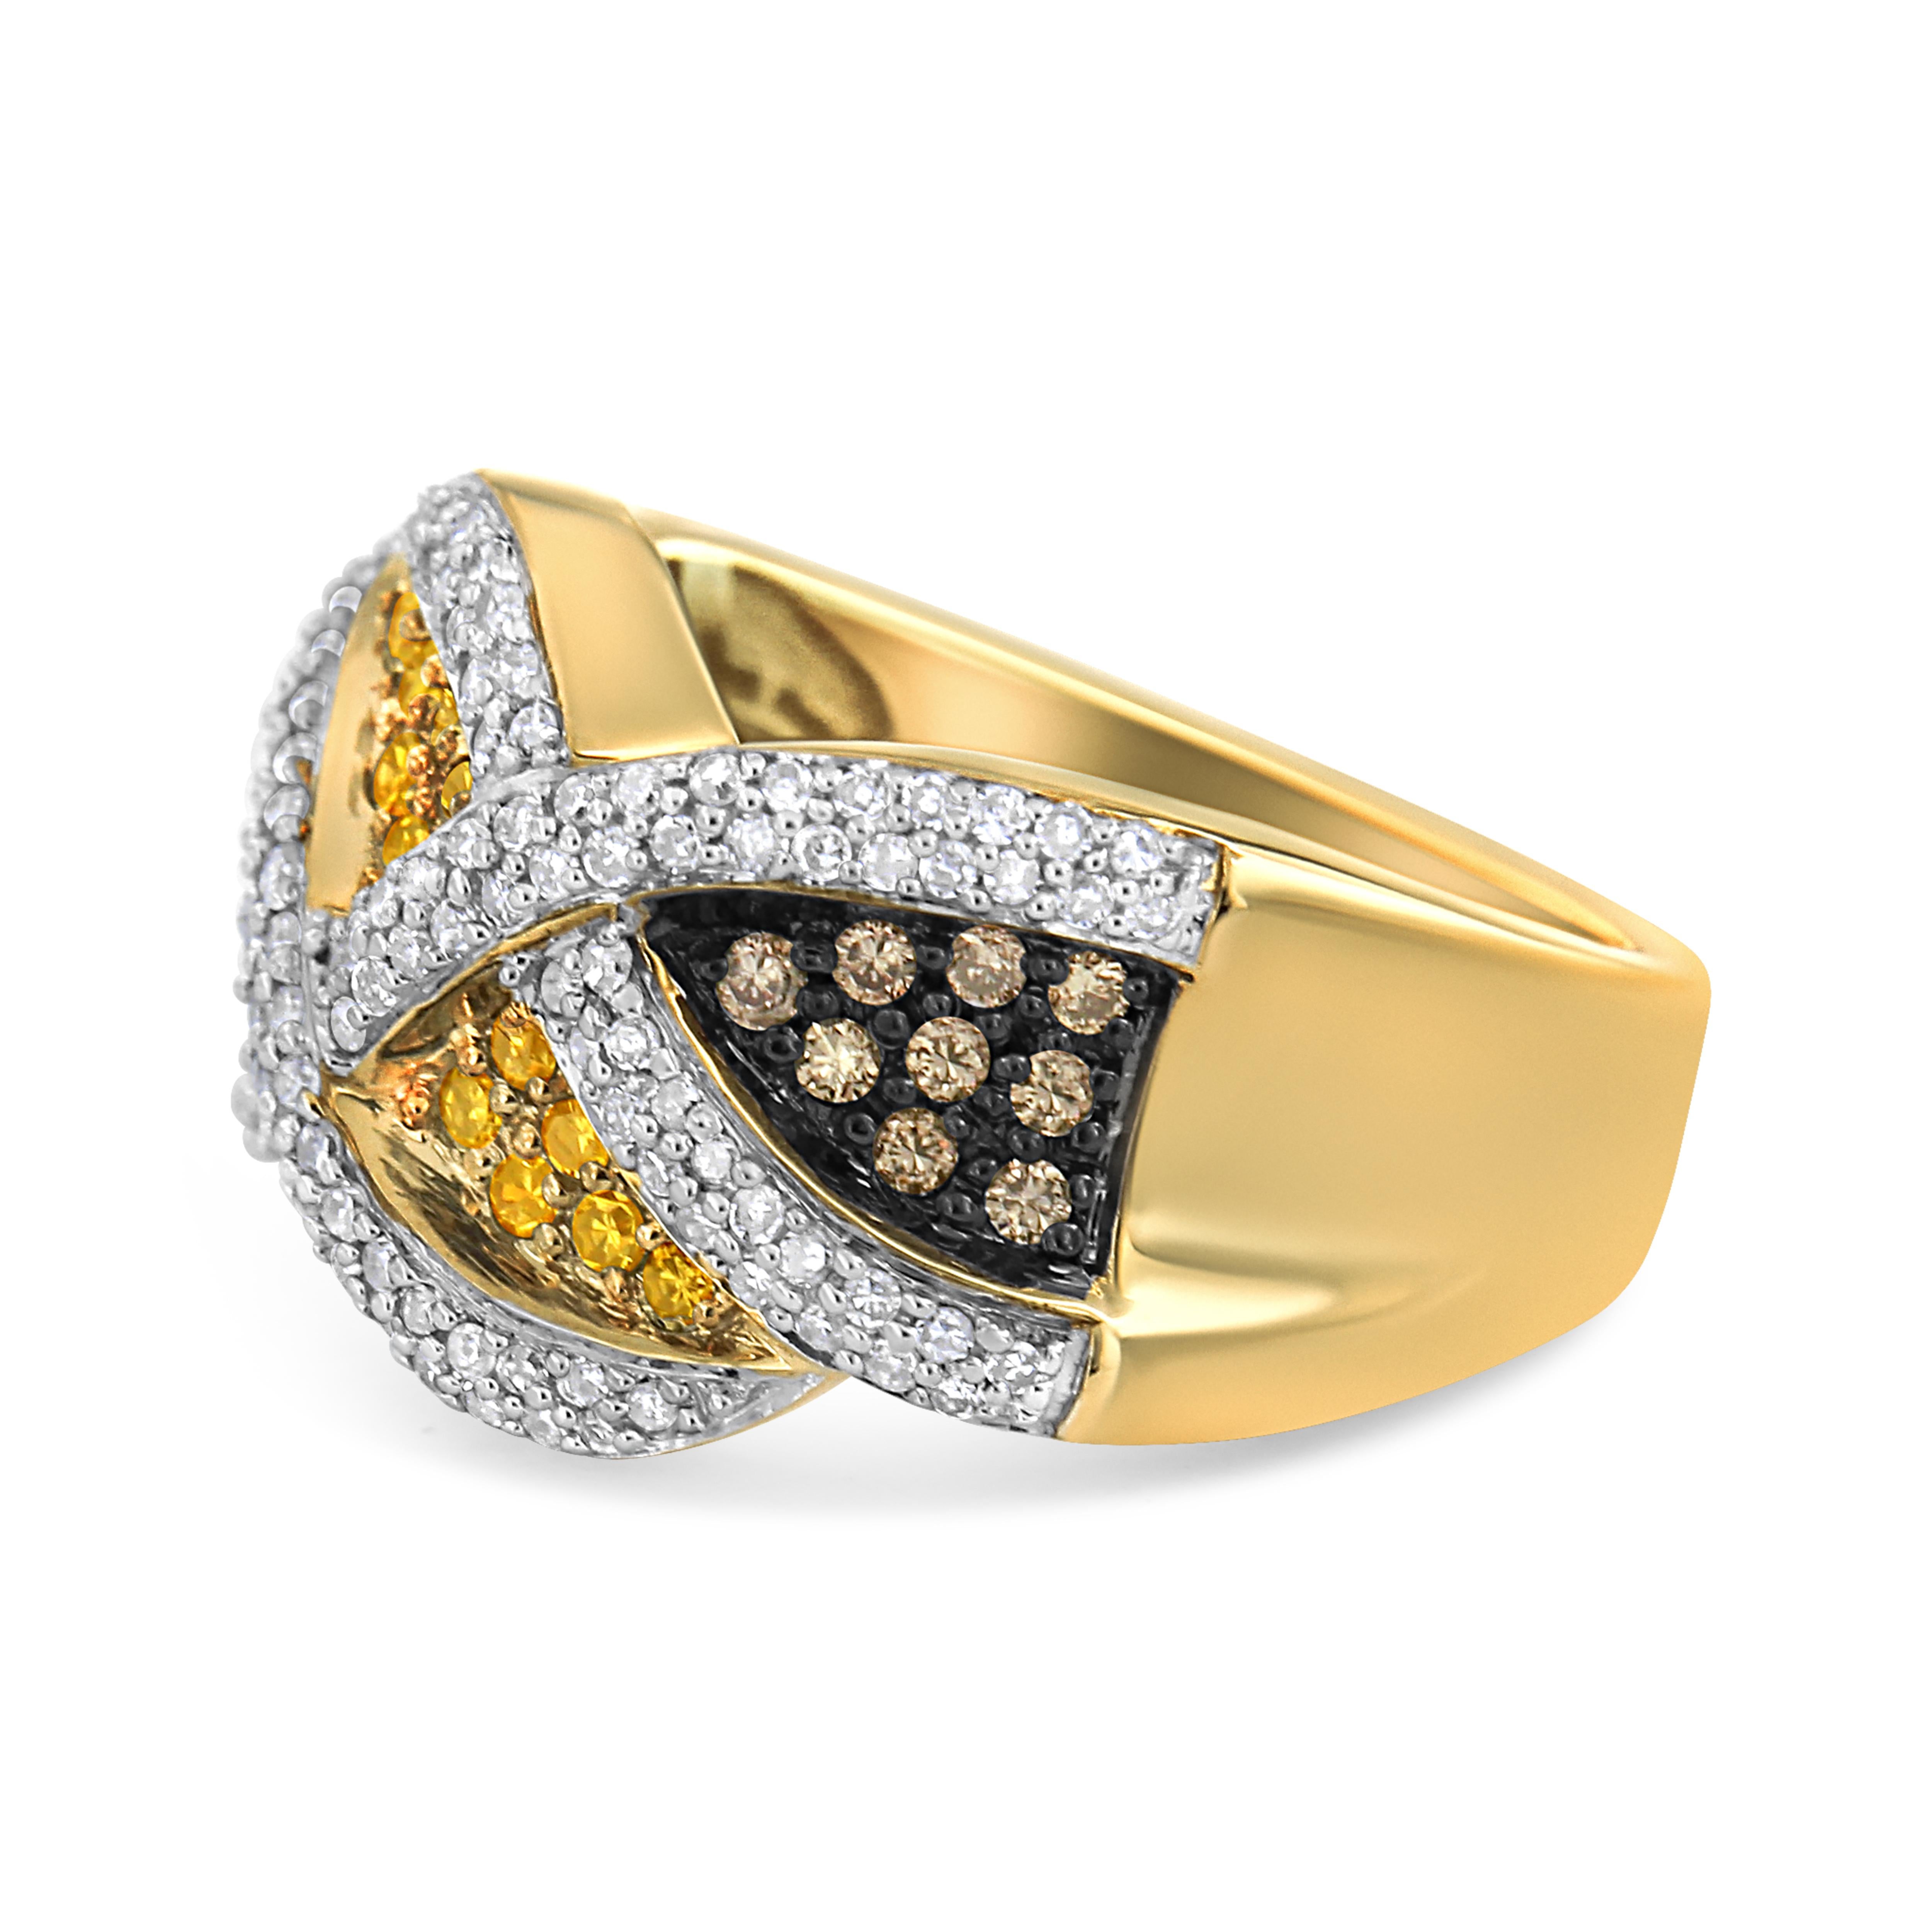 Amplify the aura of your feminine look with this graceful diamond ring. Fashioned in 14k yellow gold, this fashion ring is buffed with fine elegance of lustrous round-cut and champagne diamonds. The addition of extra yellow diamonds framed in prong